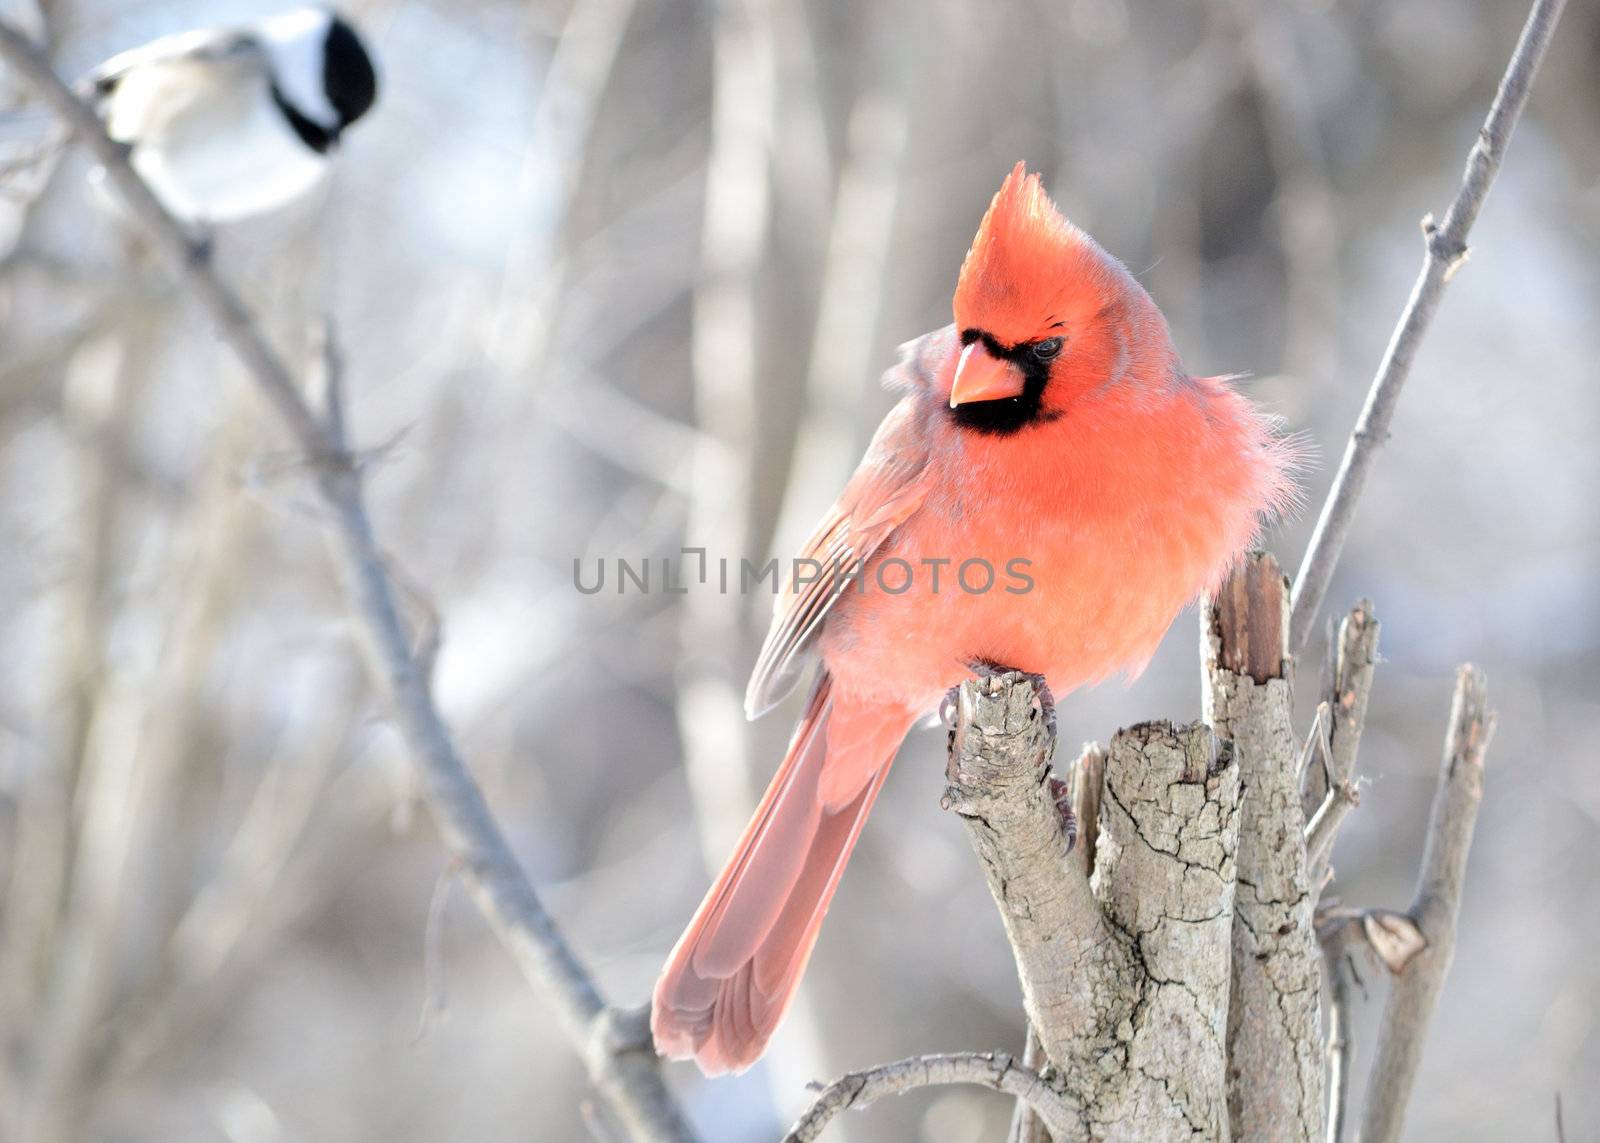  Northern Cardinal by brm1949